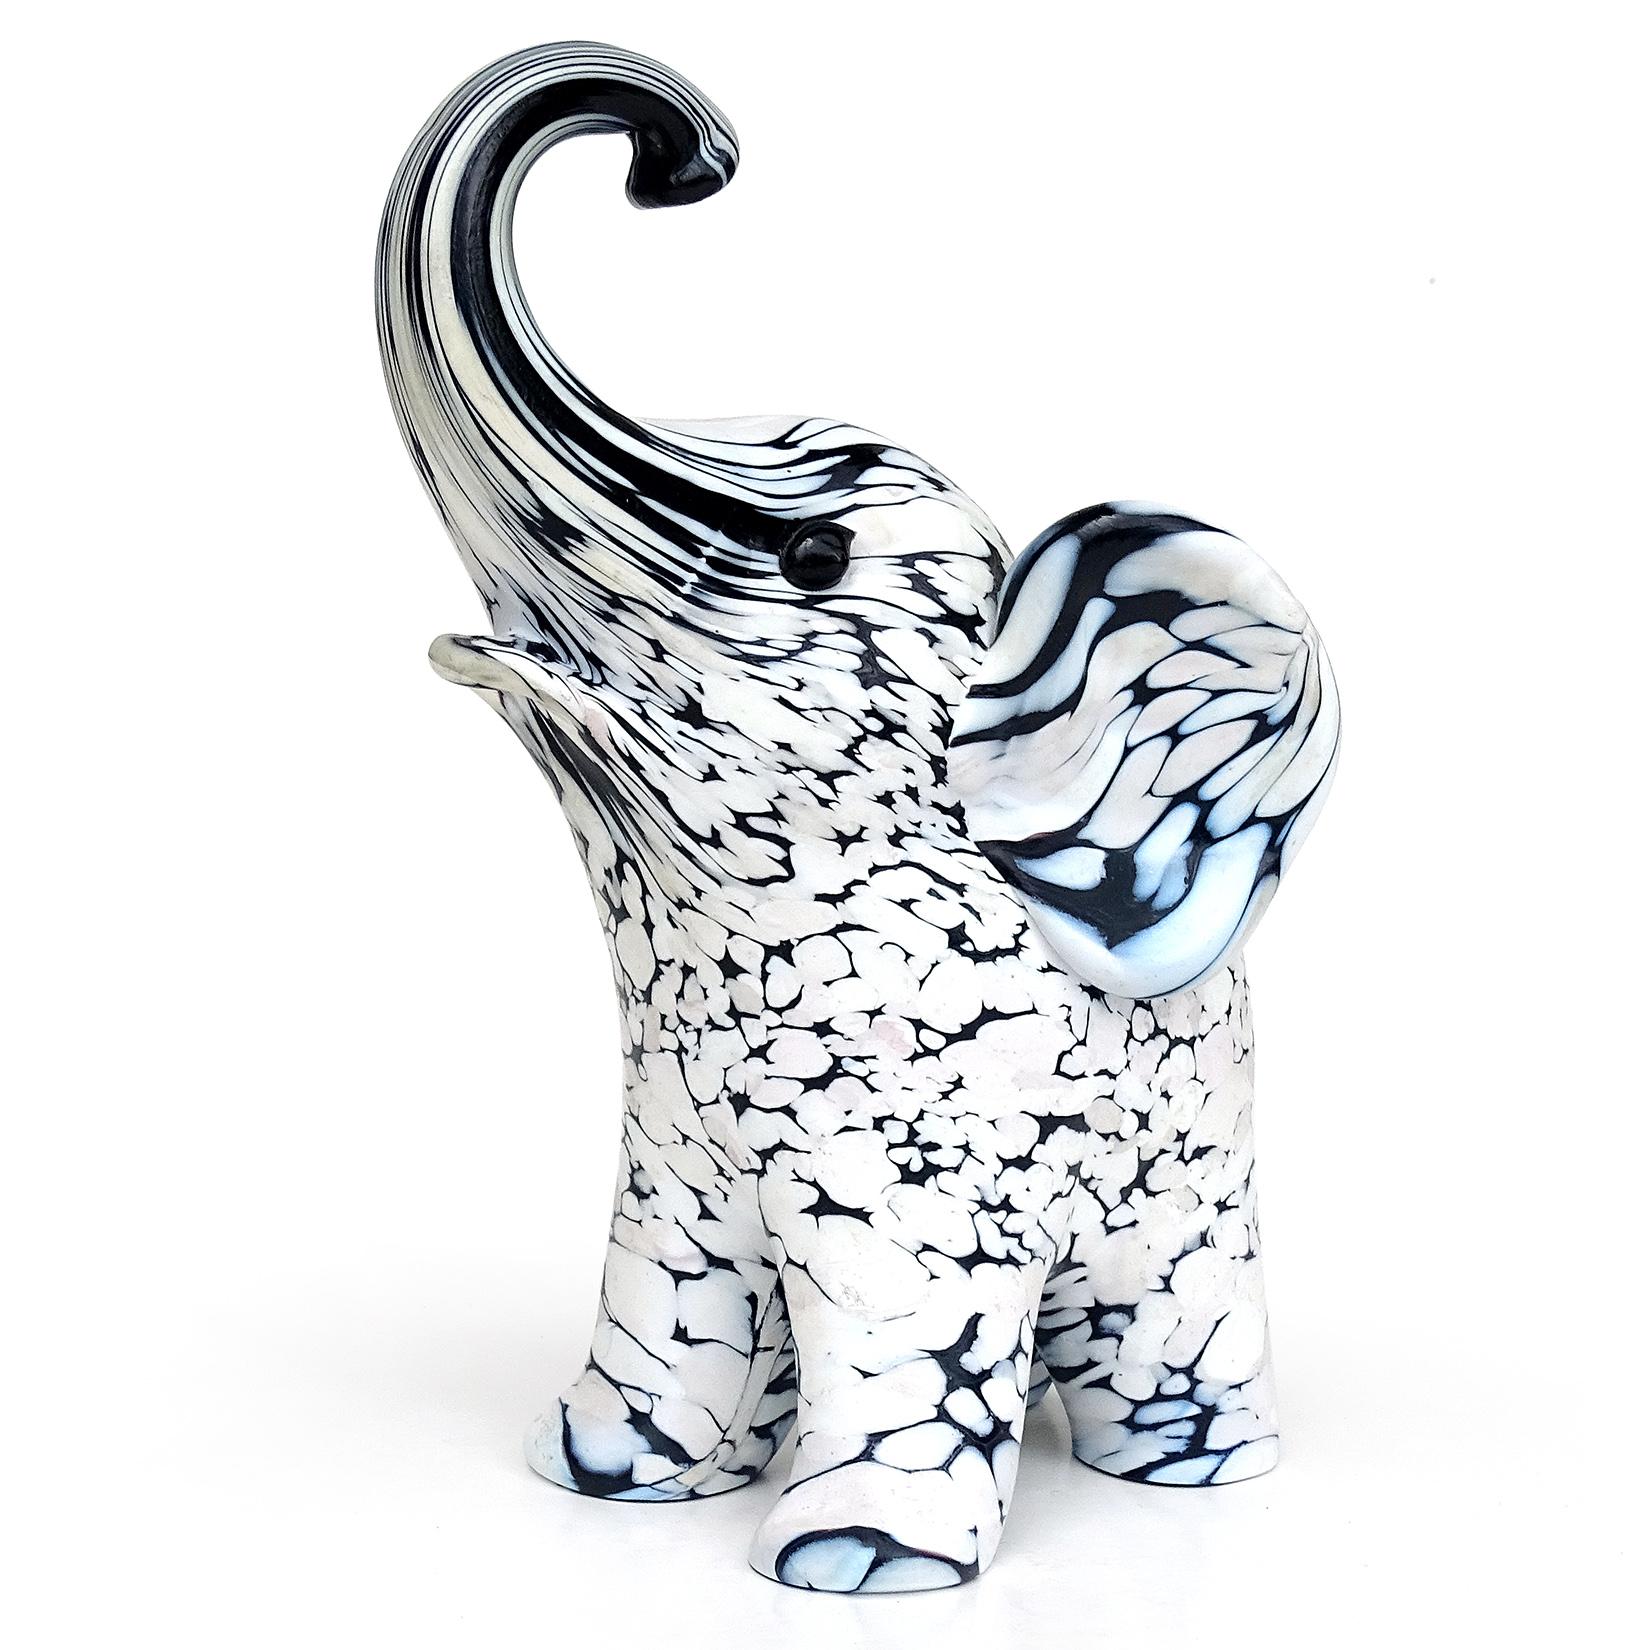 Beautiful, and rare, vintage Murano hand blown black and white spotted Italian art glass elephant sculpture. Documented to designer Archimede Seguso, from the 